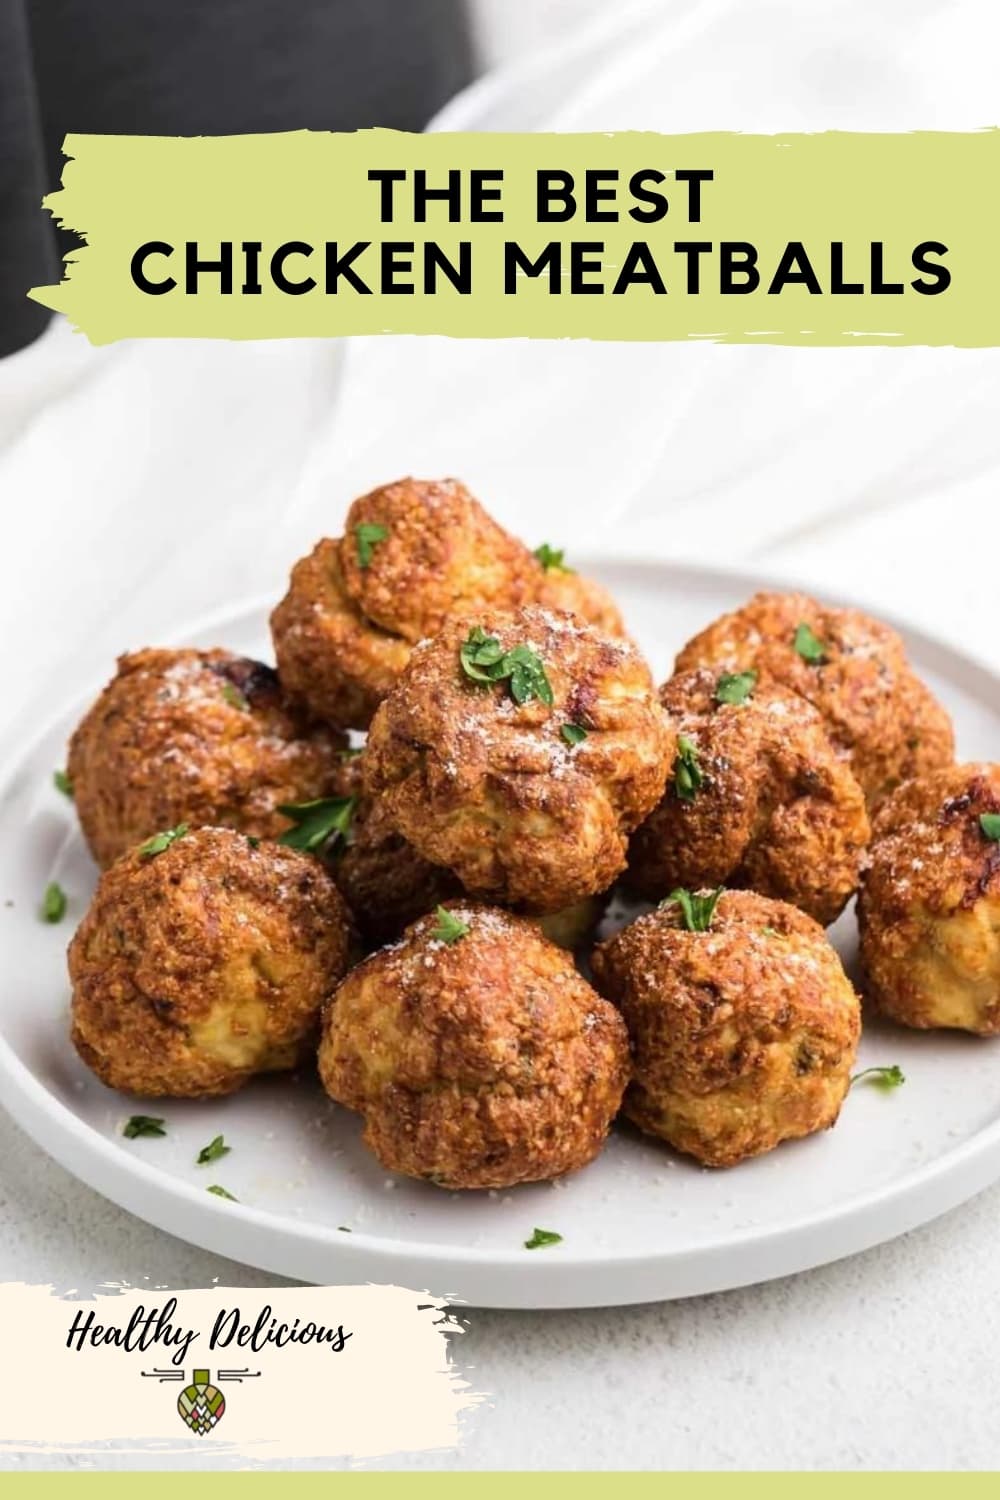 Air fryer chicken meatballs are an easy and versatile dinner that the whole family will love. They have a crisp, golden crust surrounding a juicy center and are ready in under a half-hour with minimal cleanup! Go ahead and make a double batch, because these delicious meatballs also freeze really well. These can be used as Italian-style meatballs with pasta and sauce, for Swedish meatballs, or even in meatball soup. via @HealthyDelish